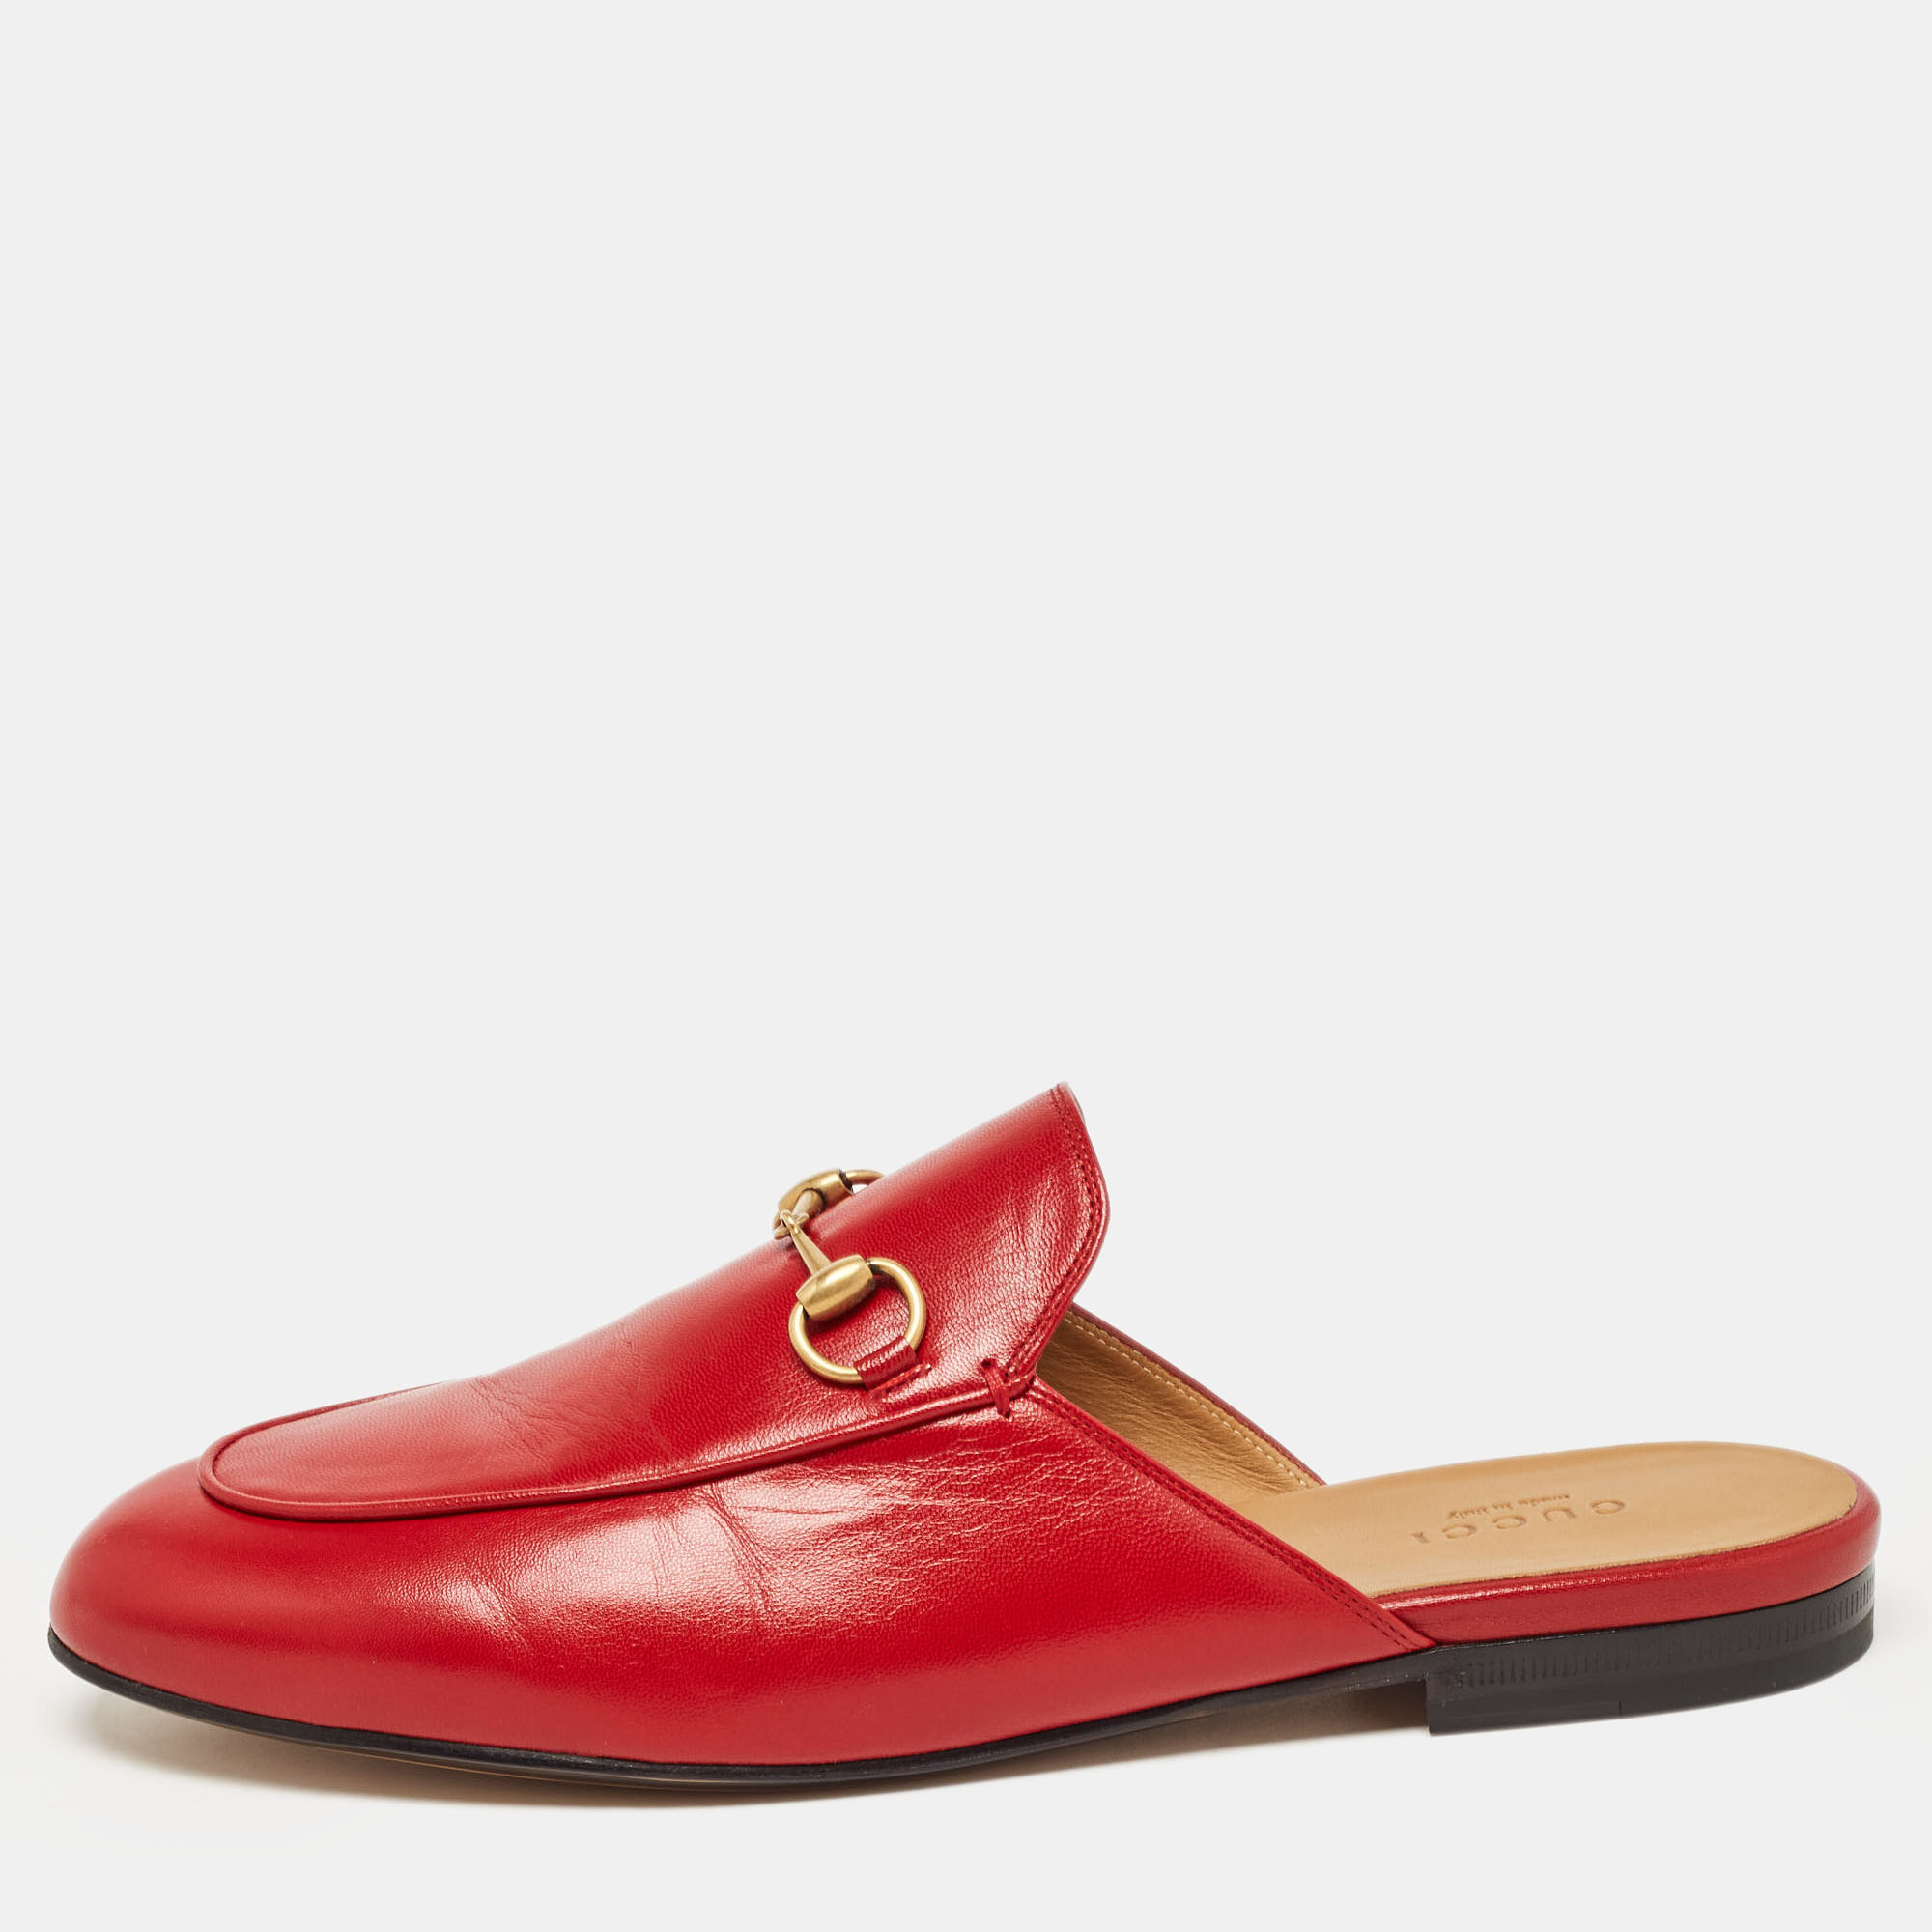 Gucci Red Leather Princetown Flat Mules Size 38.5